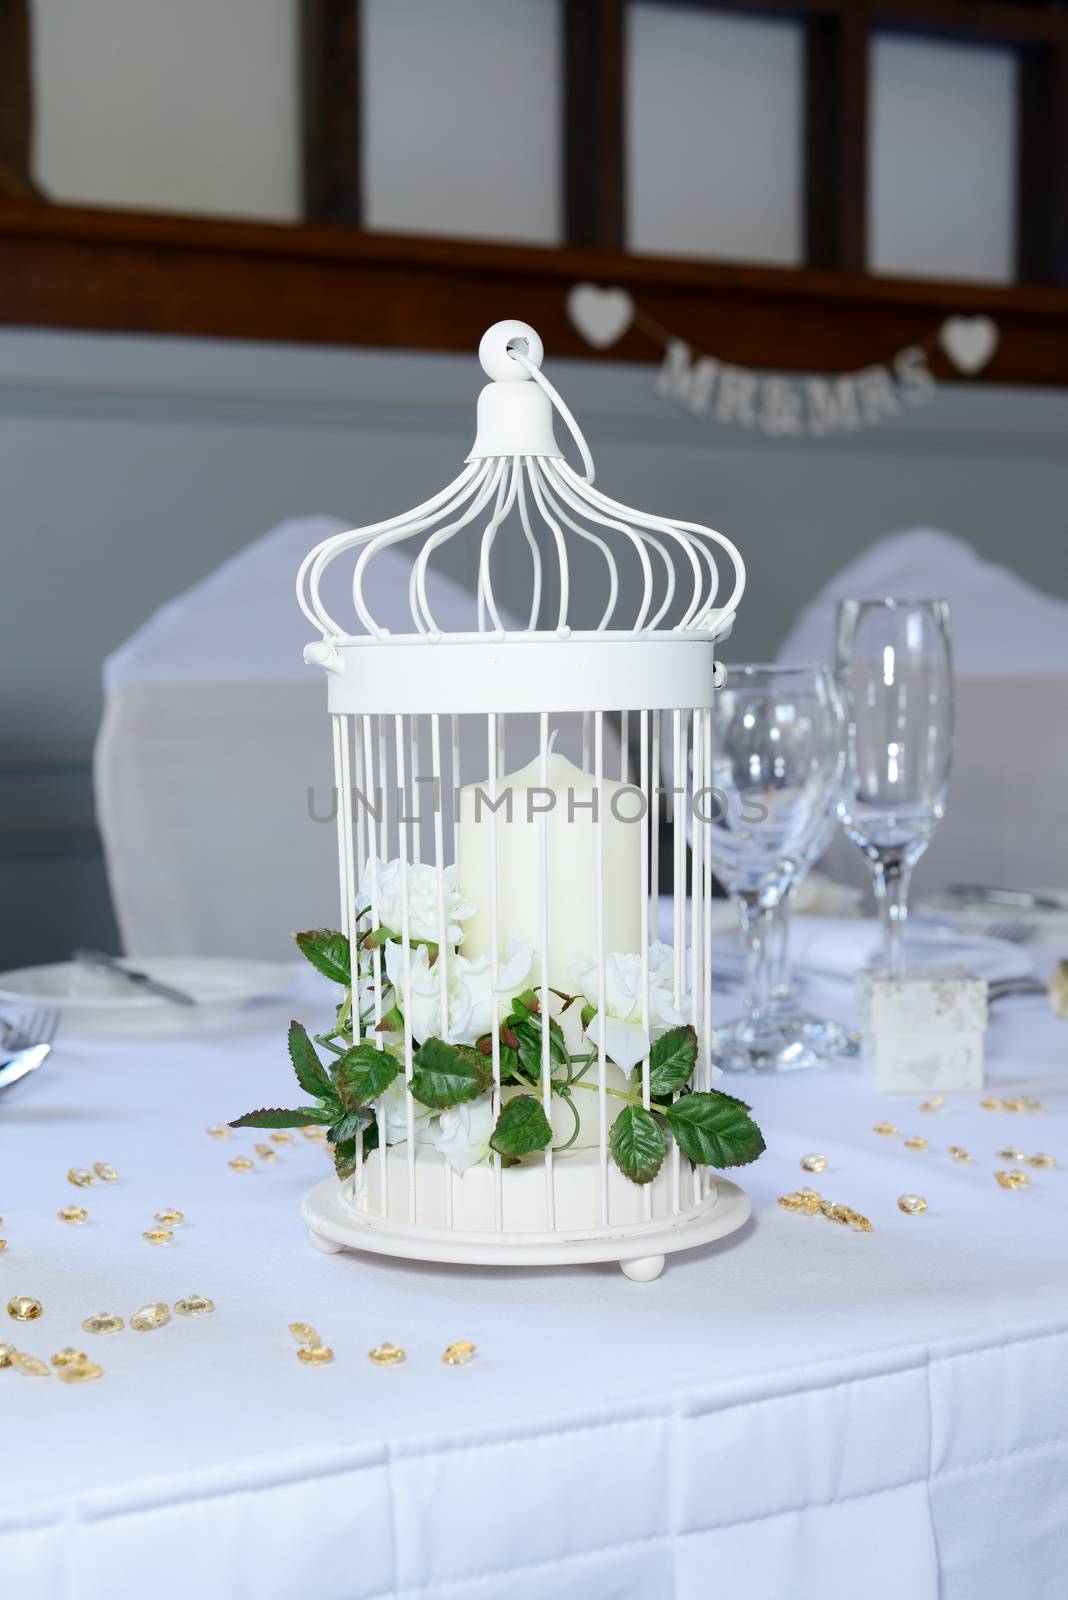 Wedding reception table closeup with details and decorations including cadle and white flowers